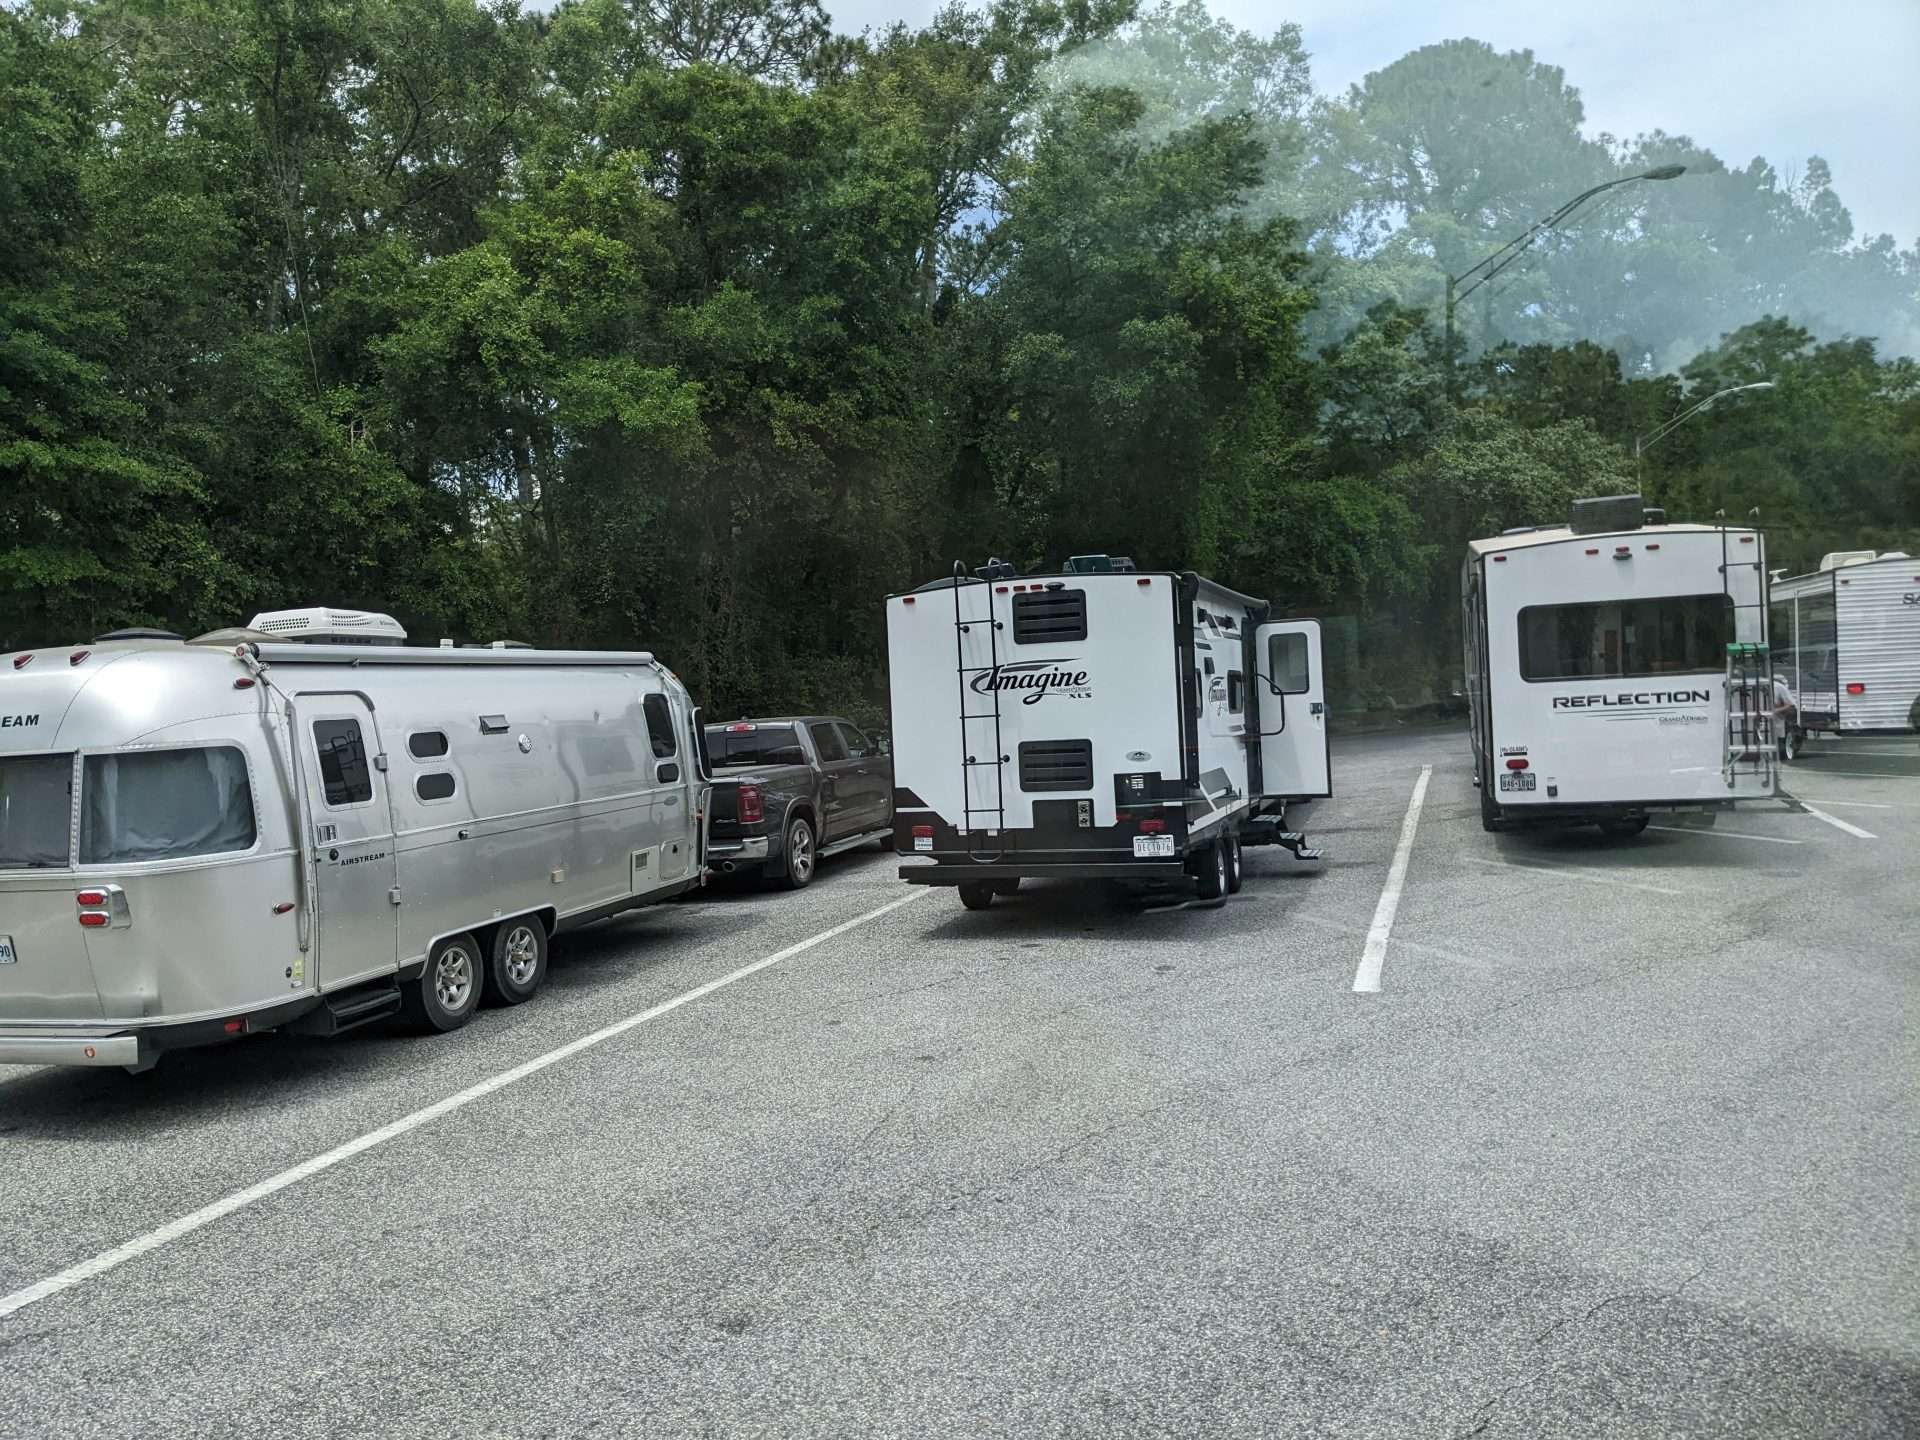 RVs parked at rest stop